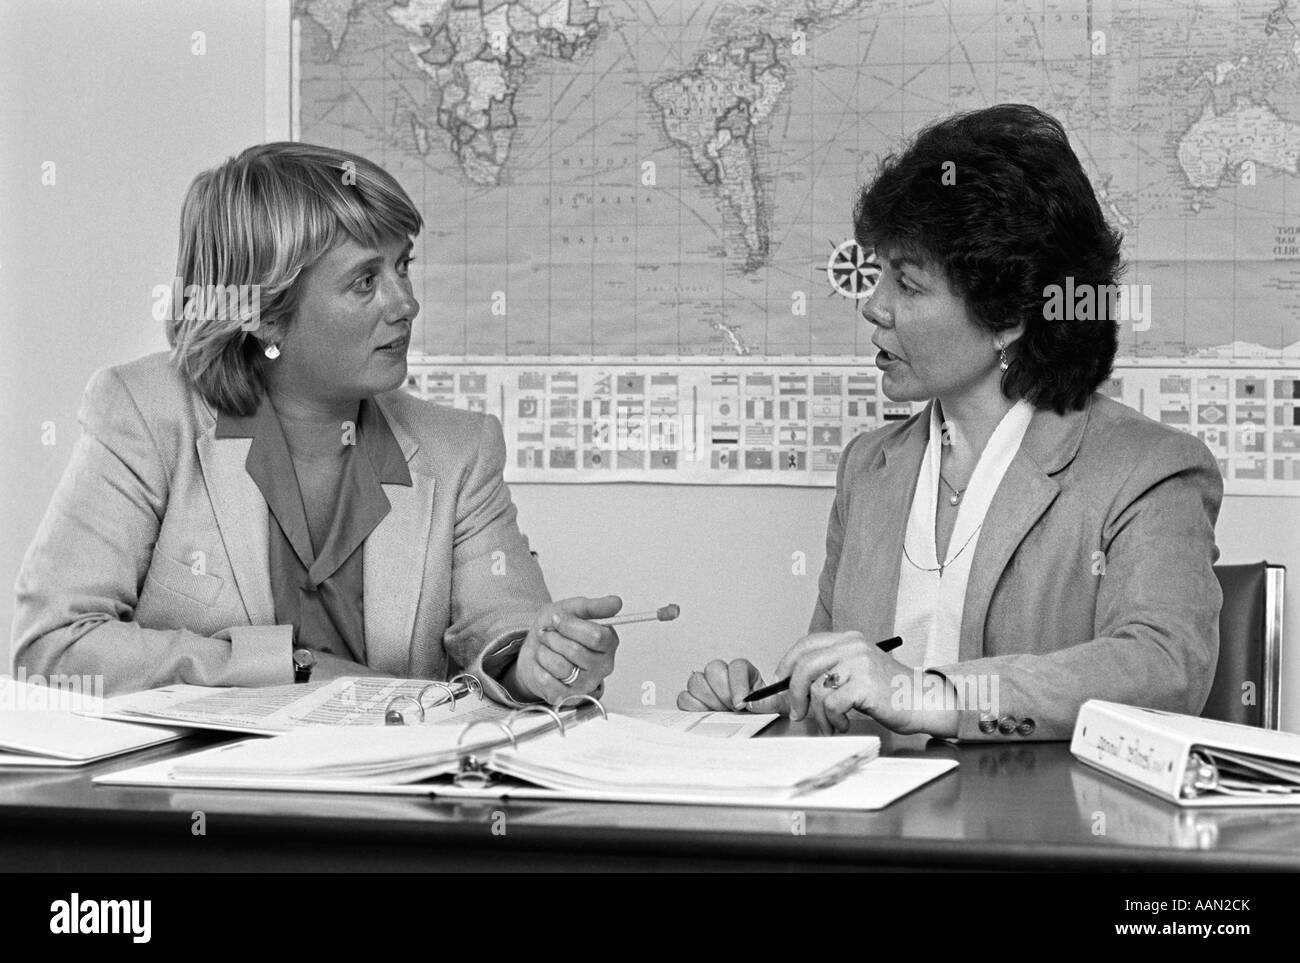 1980s PAIR OF FEMALE TEACHERS HAVING DISCUSSION NOTEBOOKS SPREAD OUT ON DESK IN FRONT OF THEM WORLD MAP ON WALL IN BACKGROUND Stock Photo